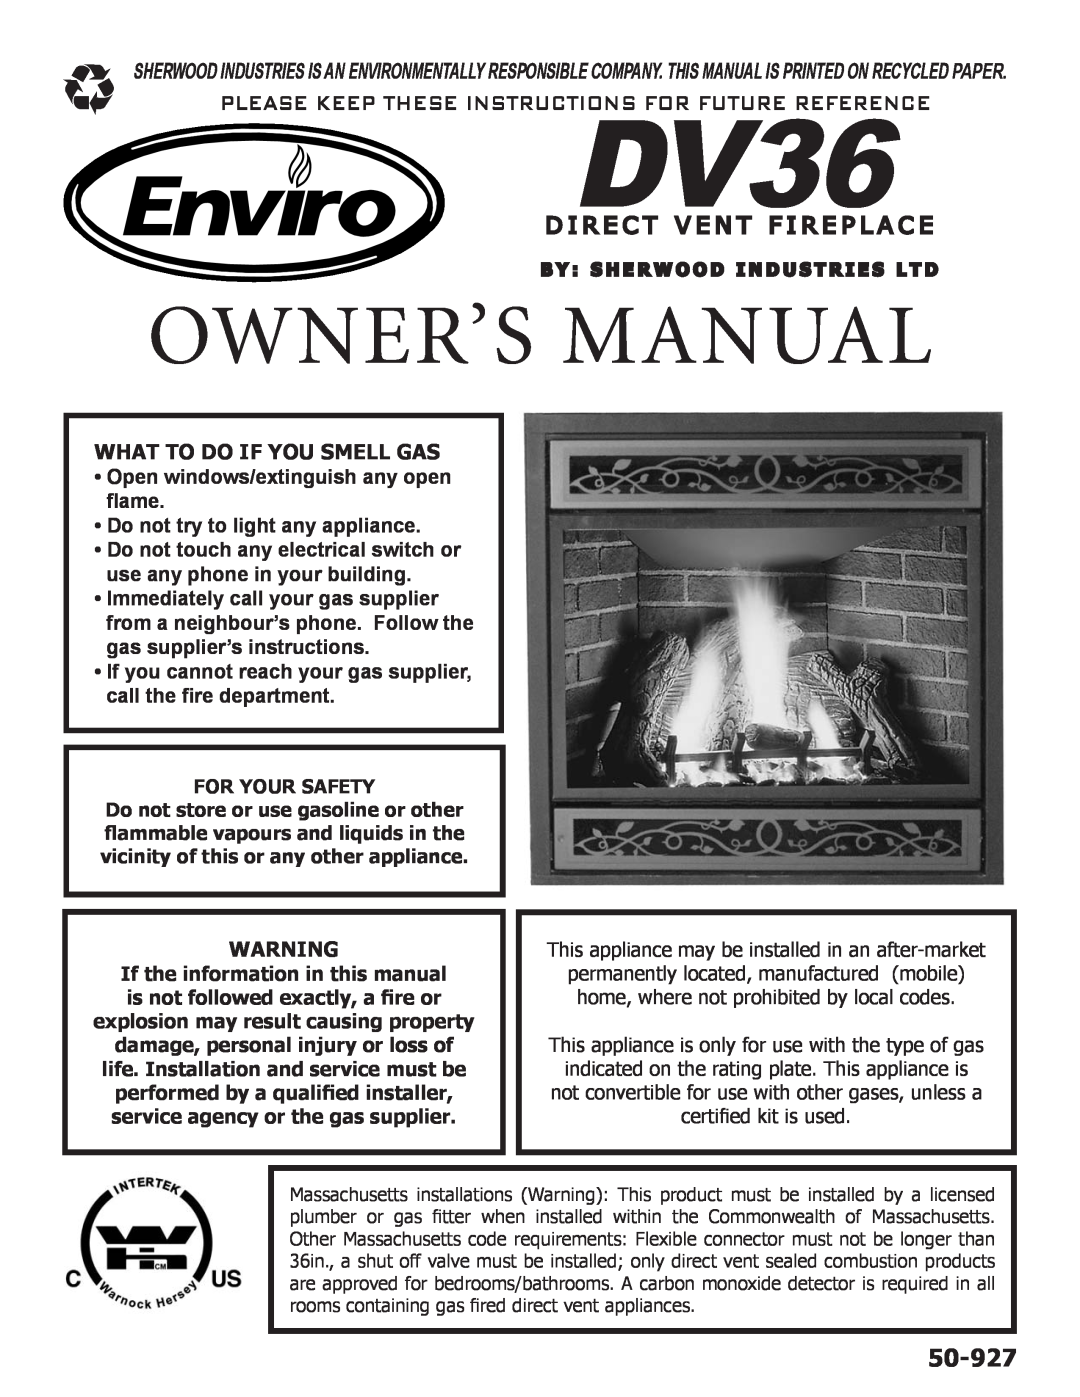 Enviro DV36 owner manual What To Do If You Smell Gas, For Your Safety, 50-927, D Ir Ec T V En T Fir Ep La C E 